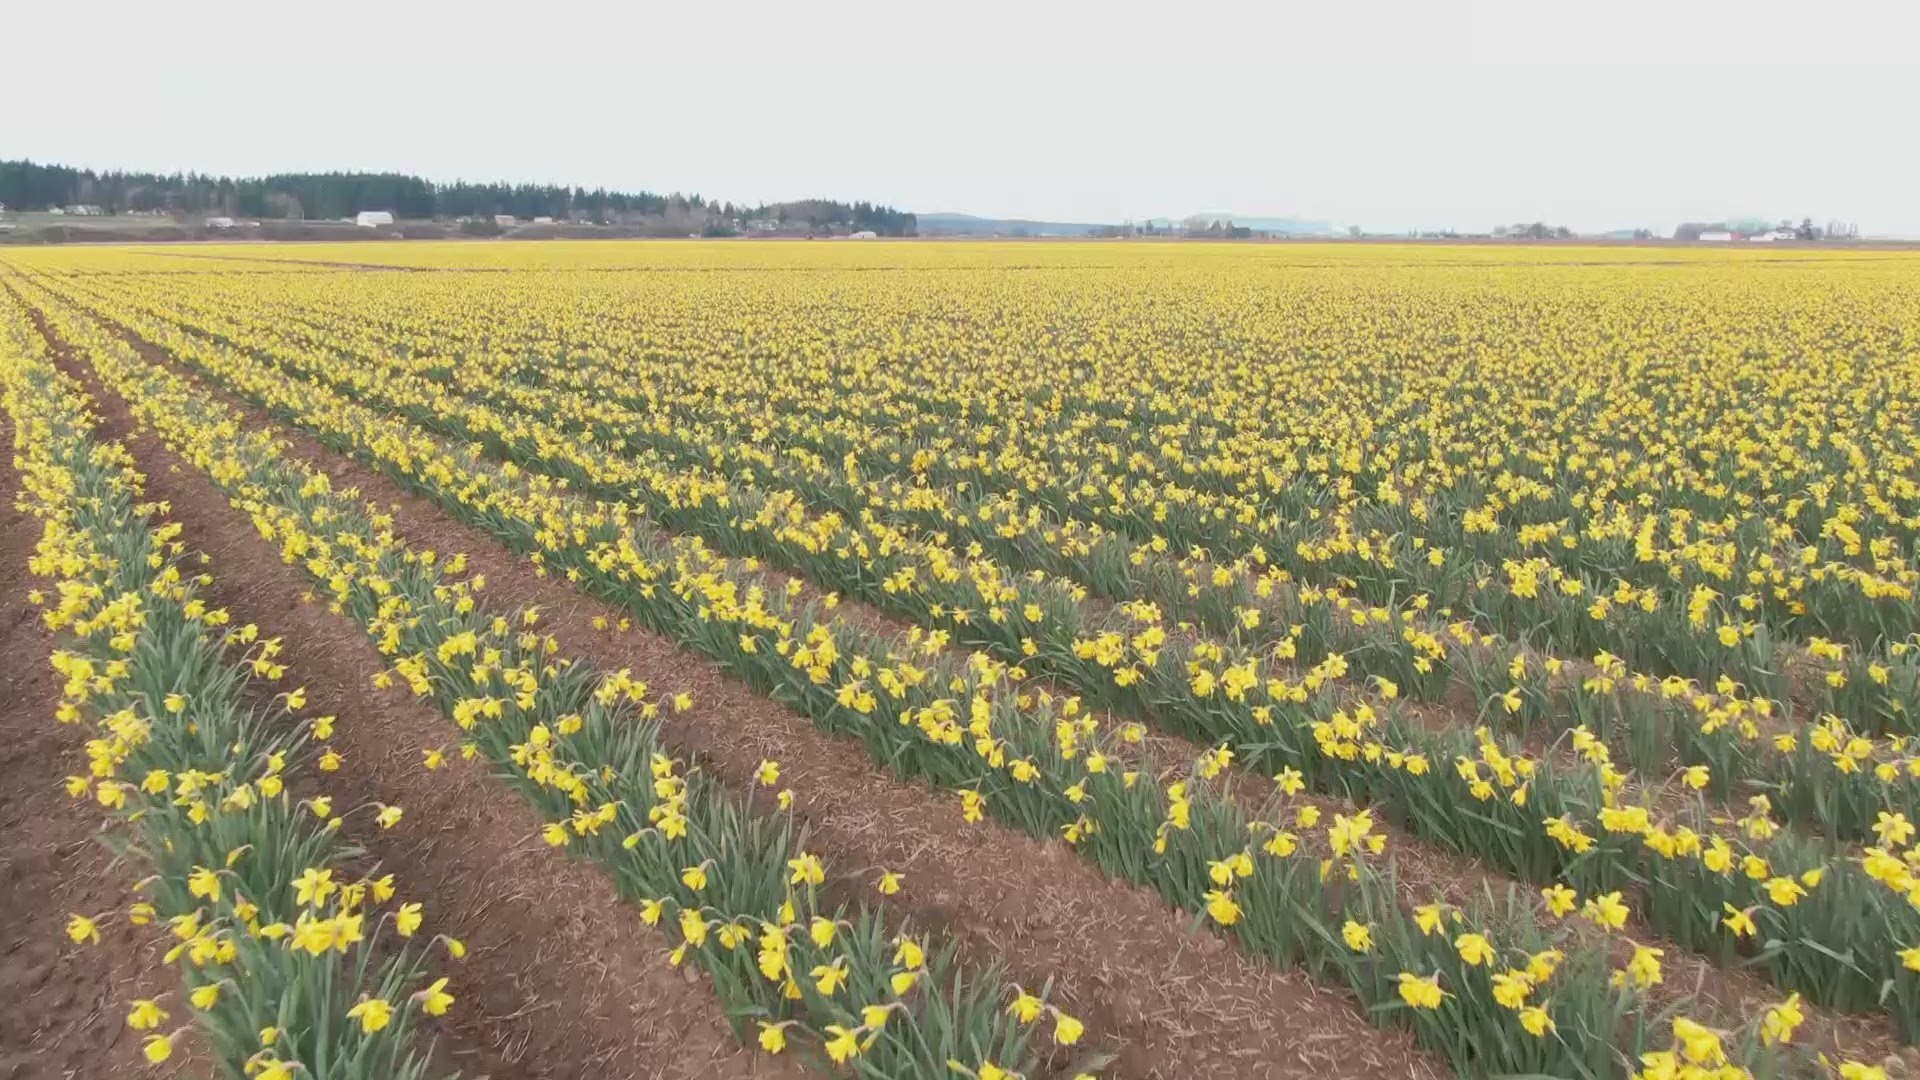 Take in a birds-eye view of the daffodils in full bloom in Skagit Valley on March 17, 2021.